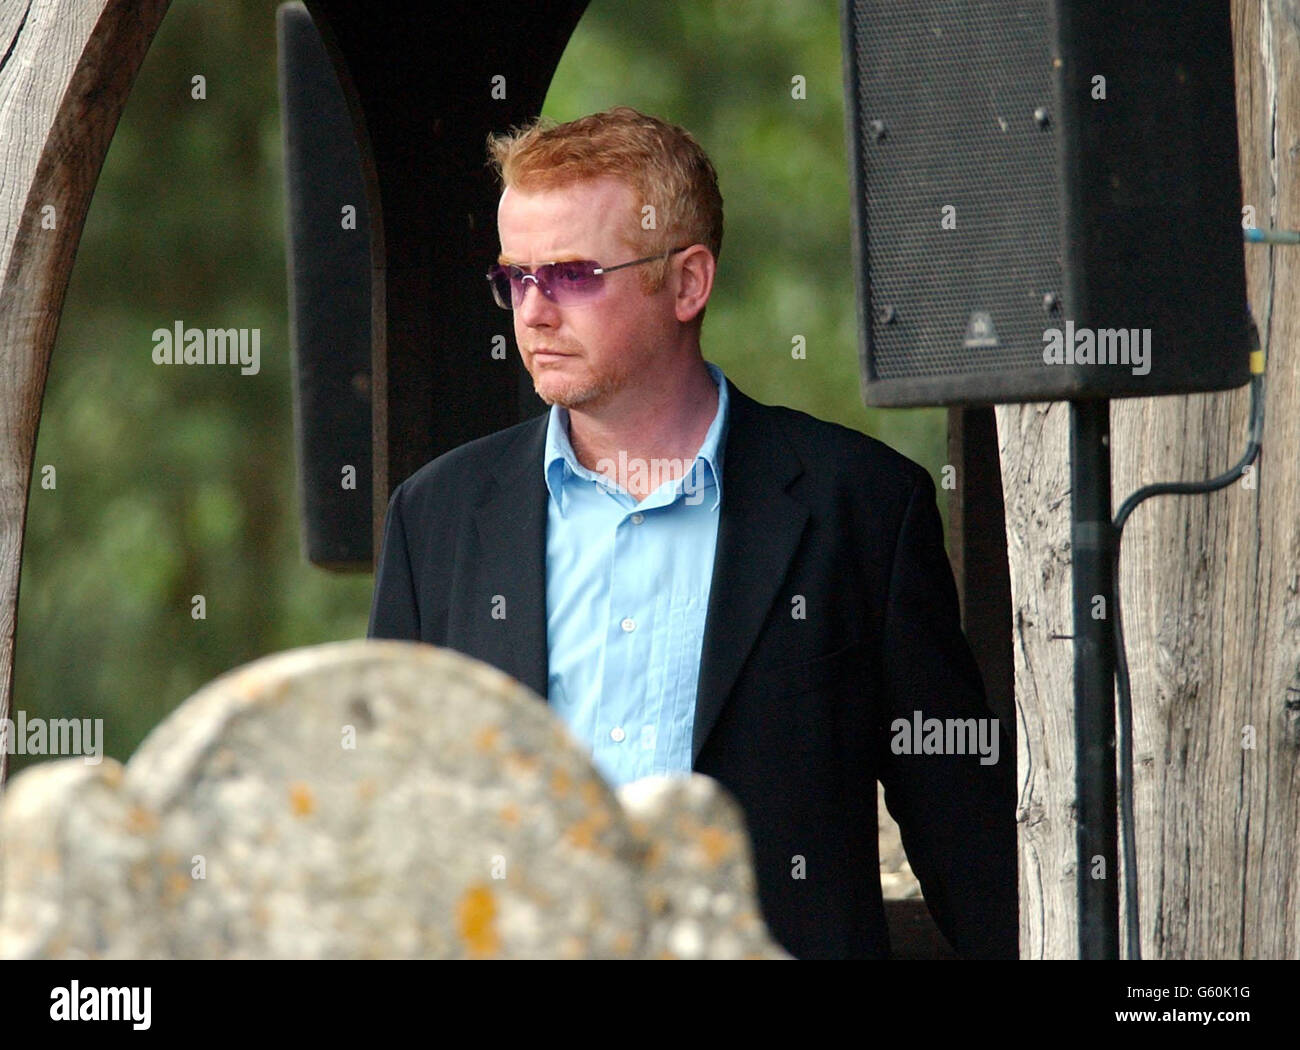 TV personality Chris Evans attends the funeral at Hascombe, Surrey, of his friend James Ward, who died in a sailing accident. Stock Photo